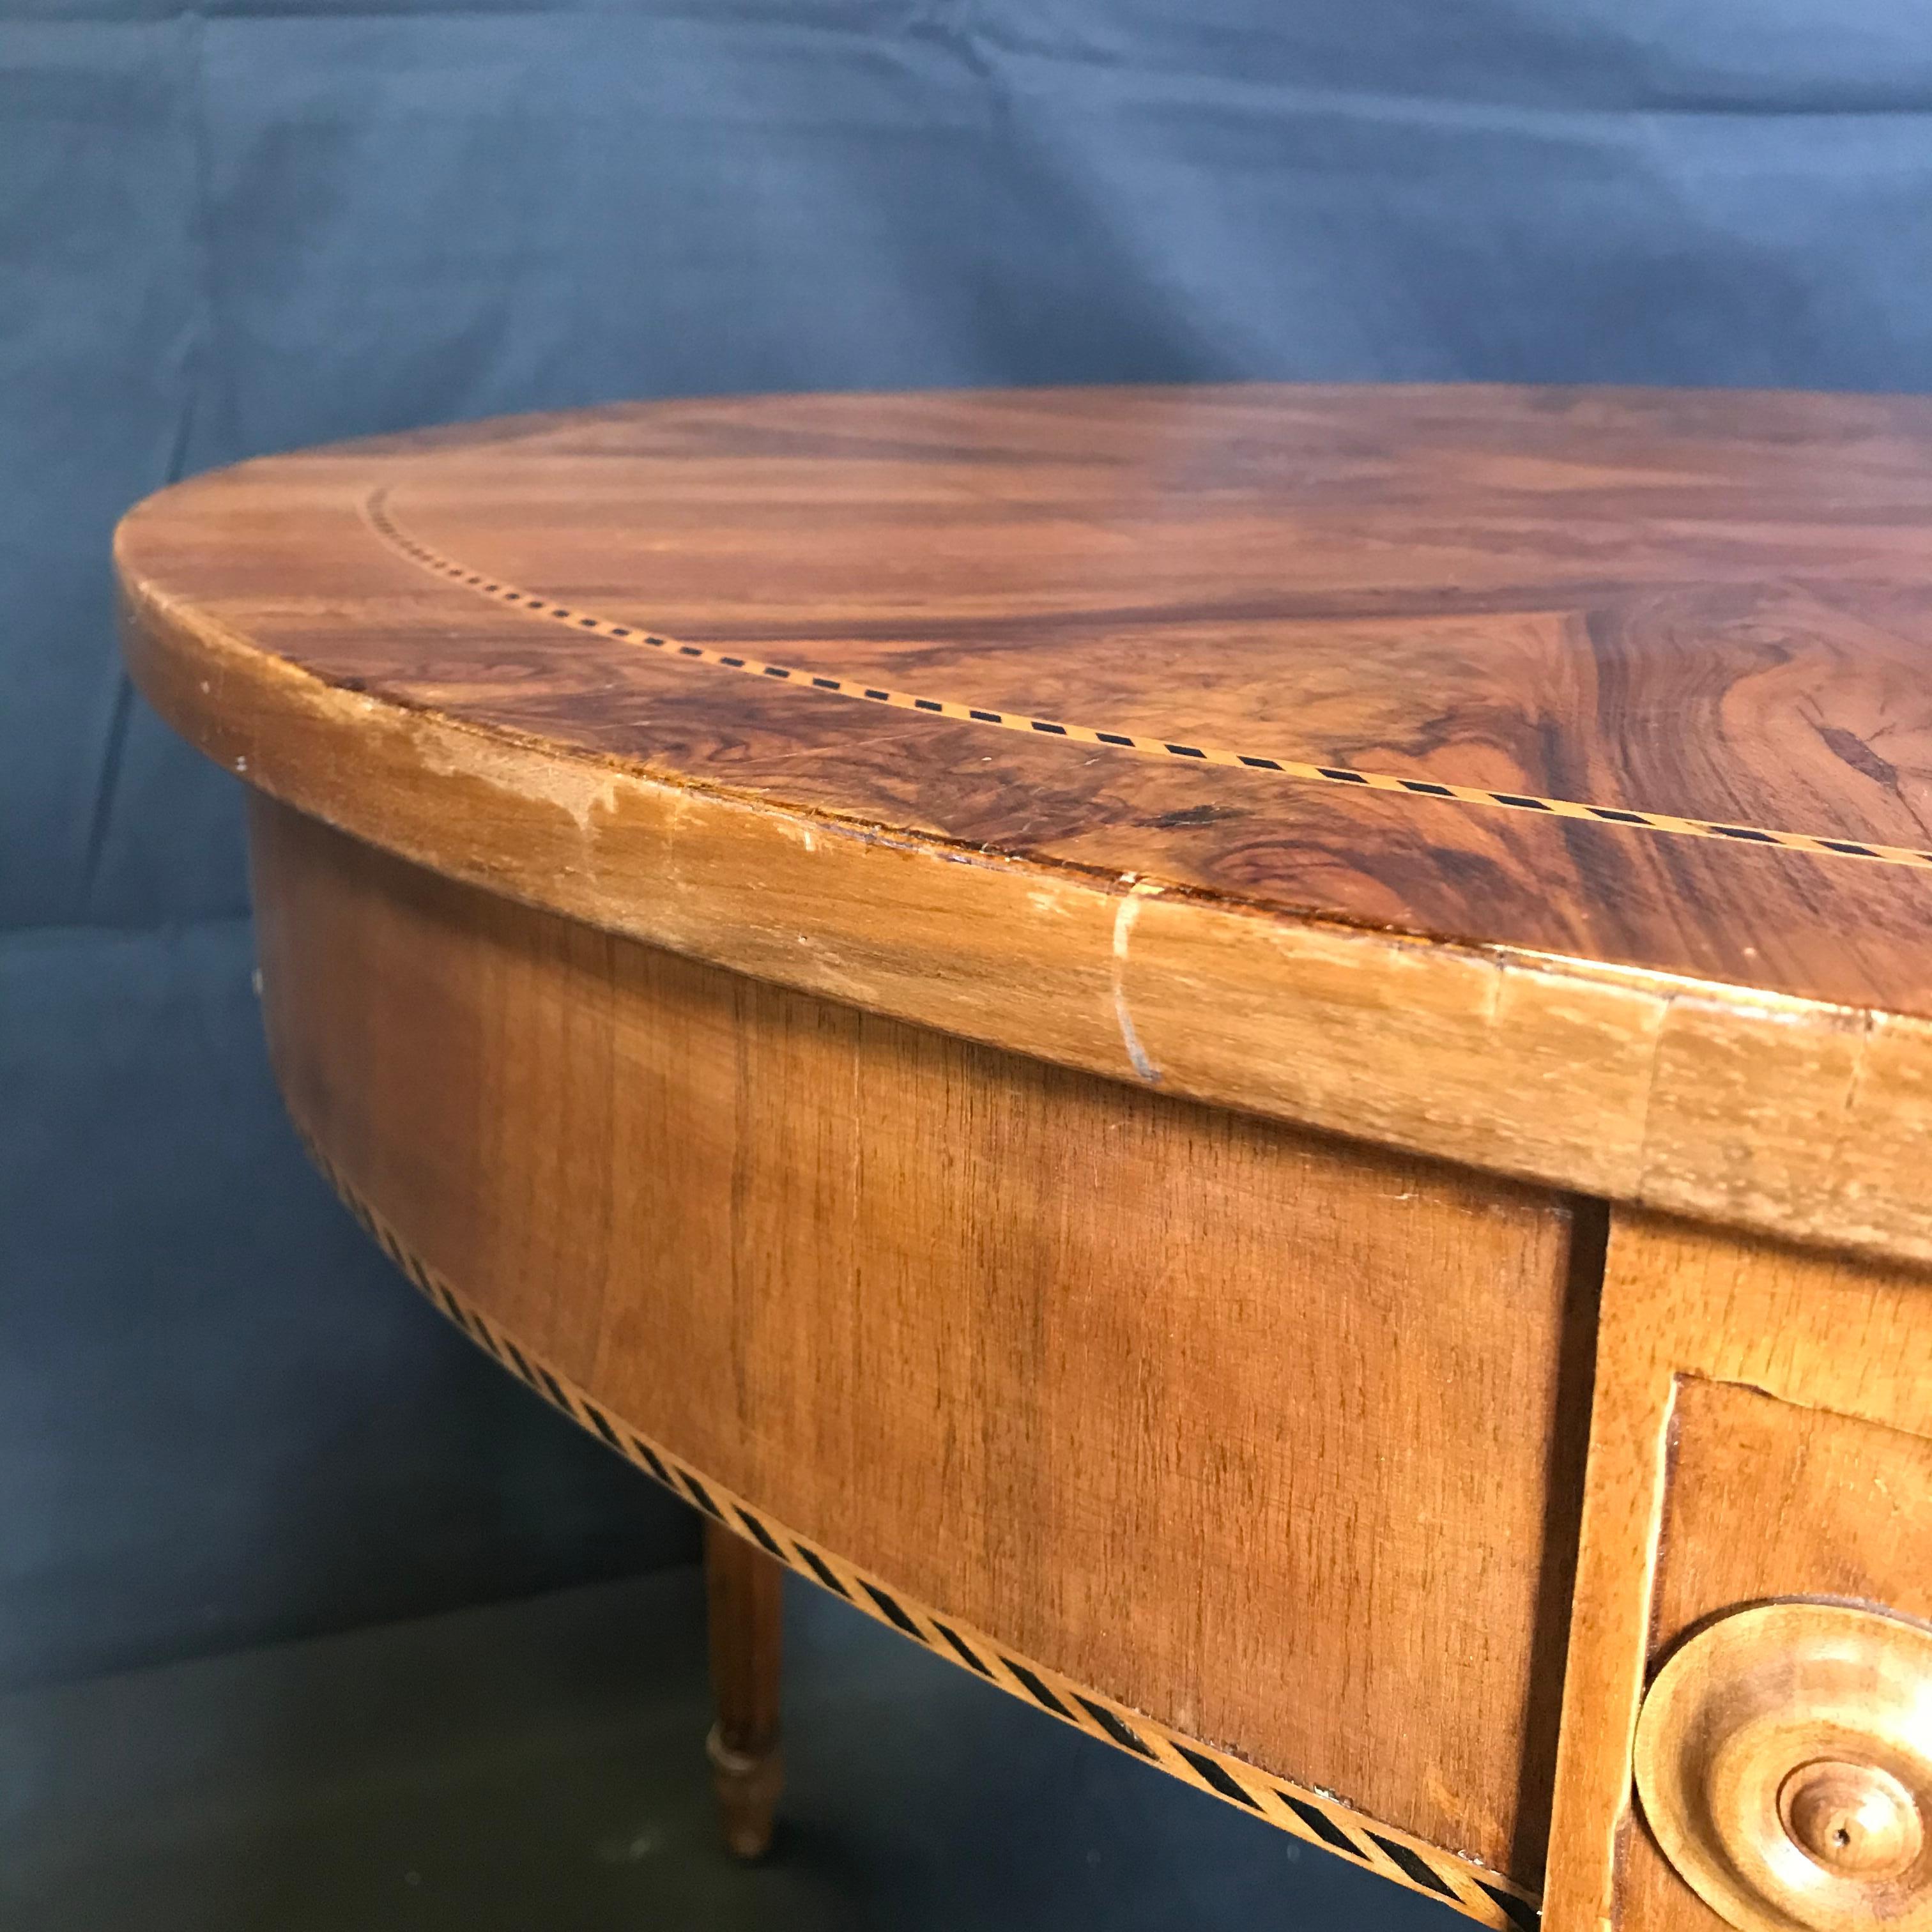 Gorgeous French inlaid round marquetry table with beautiful circular block pattern surrounding the burled walnut center, circa 1880.
#4468
Measure: H skirt 24.25